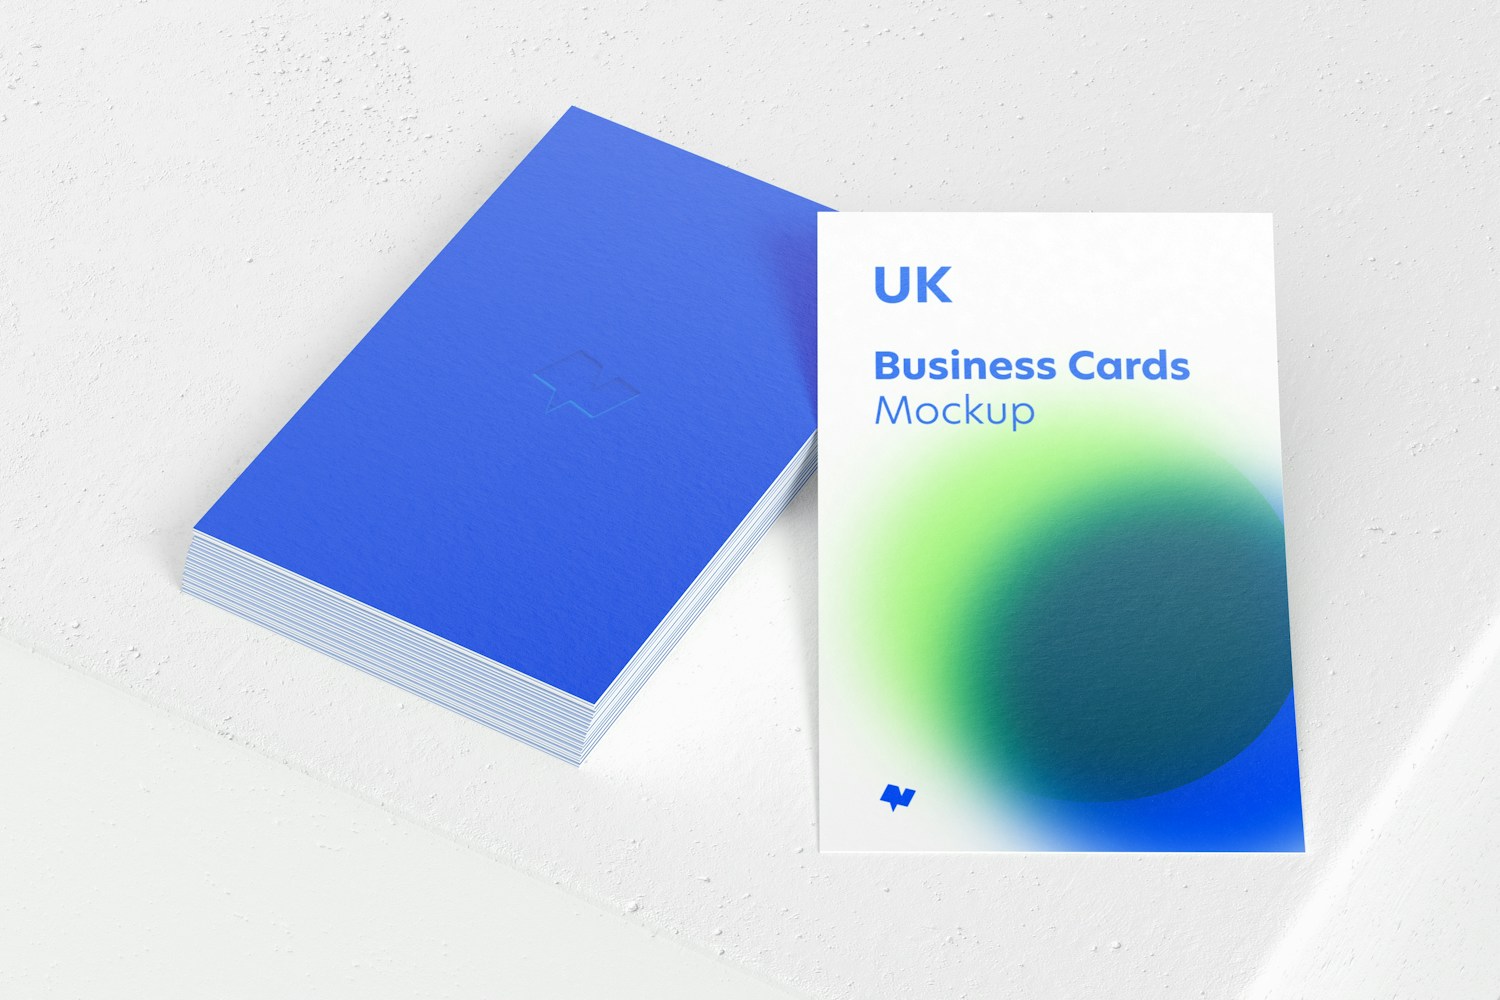 UK Portrait Business Cards Mockup, Perspective View